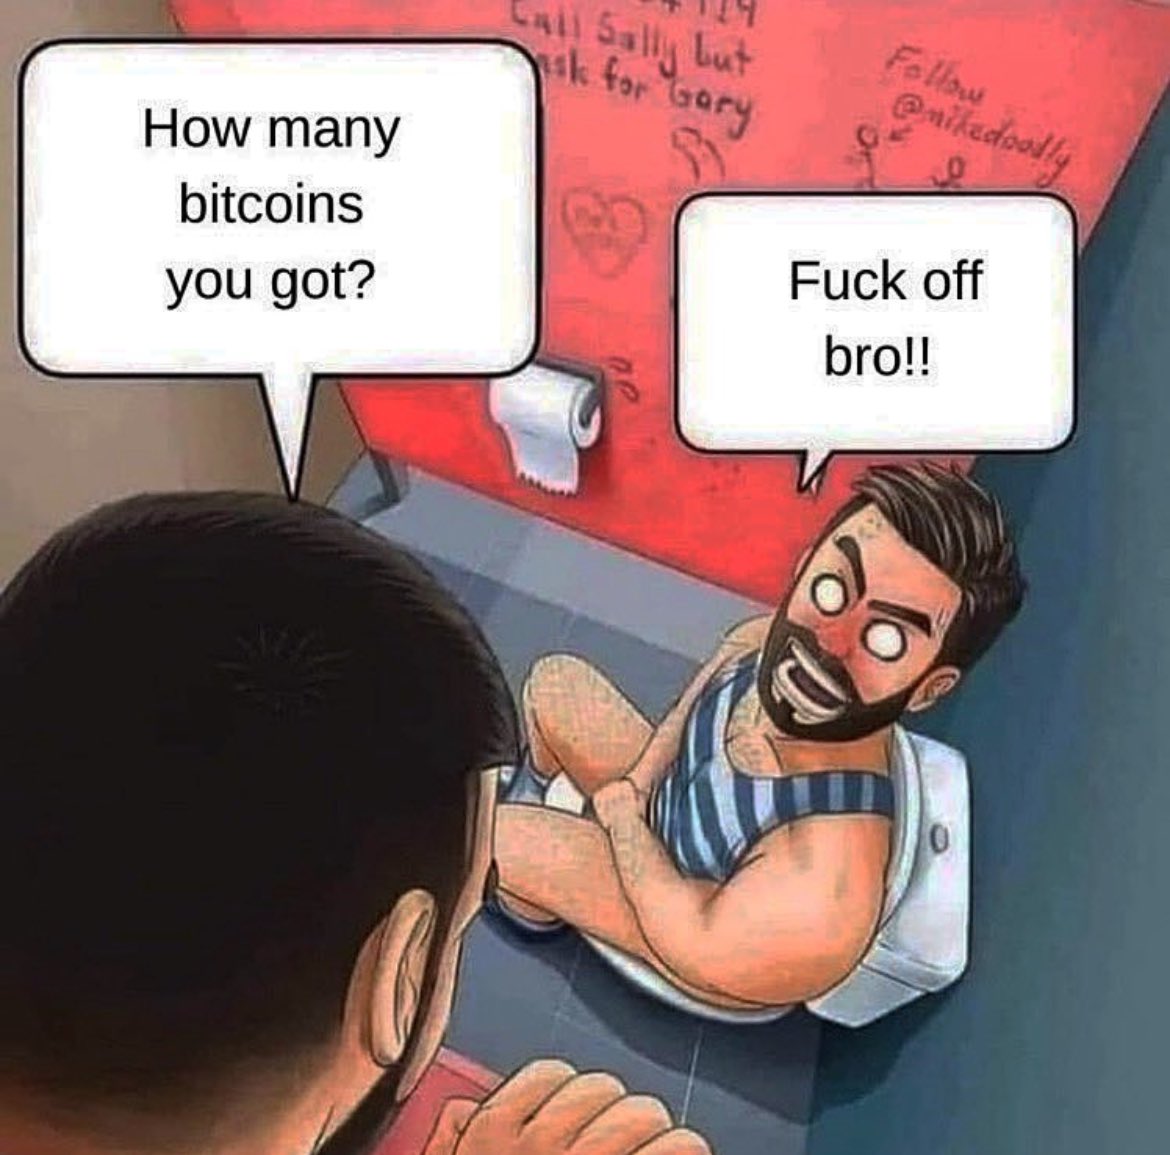 tk § but
How many Q 2“it
bitcoins = A
you got? Fuck off
N - | bro!